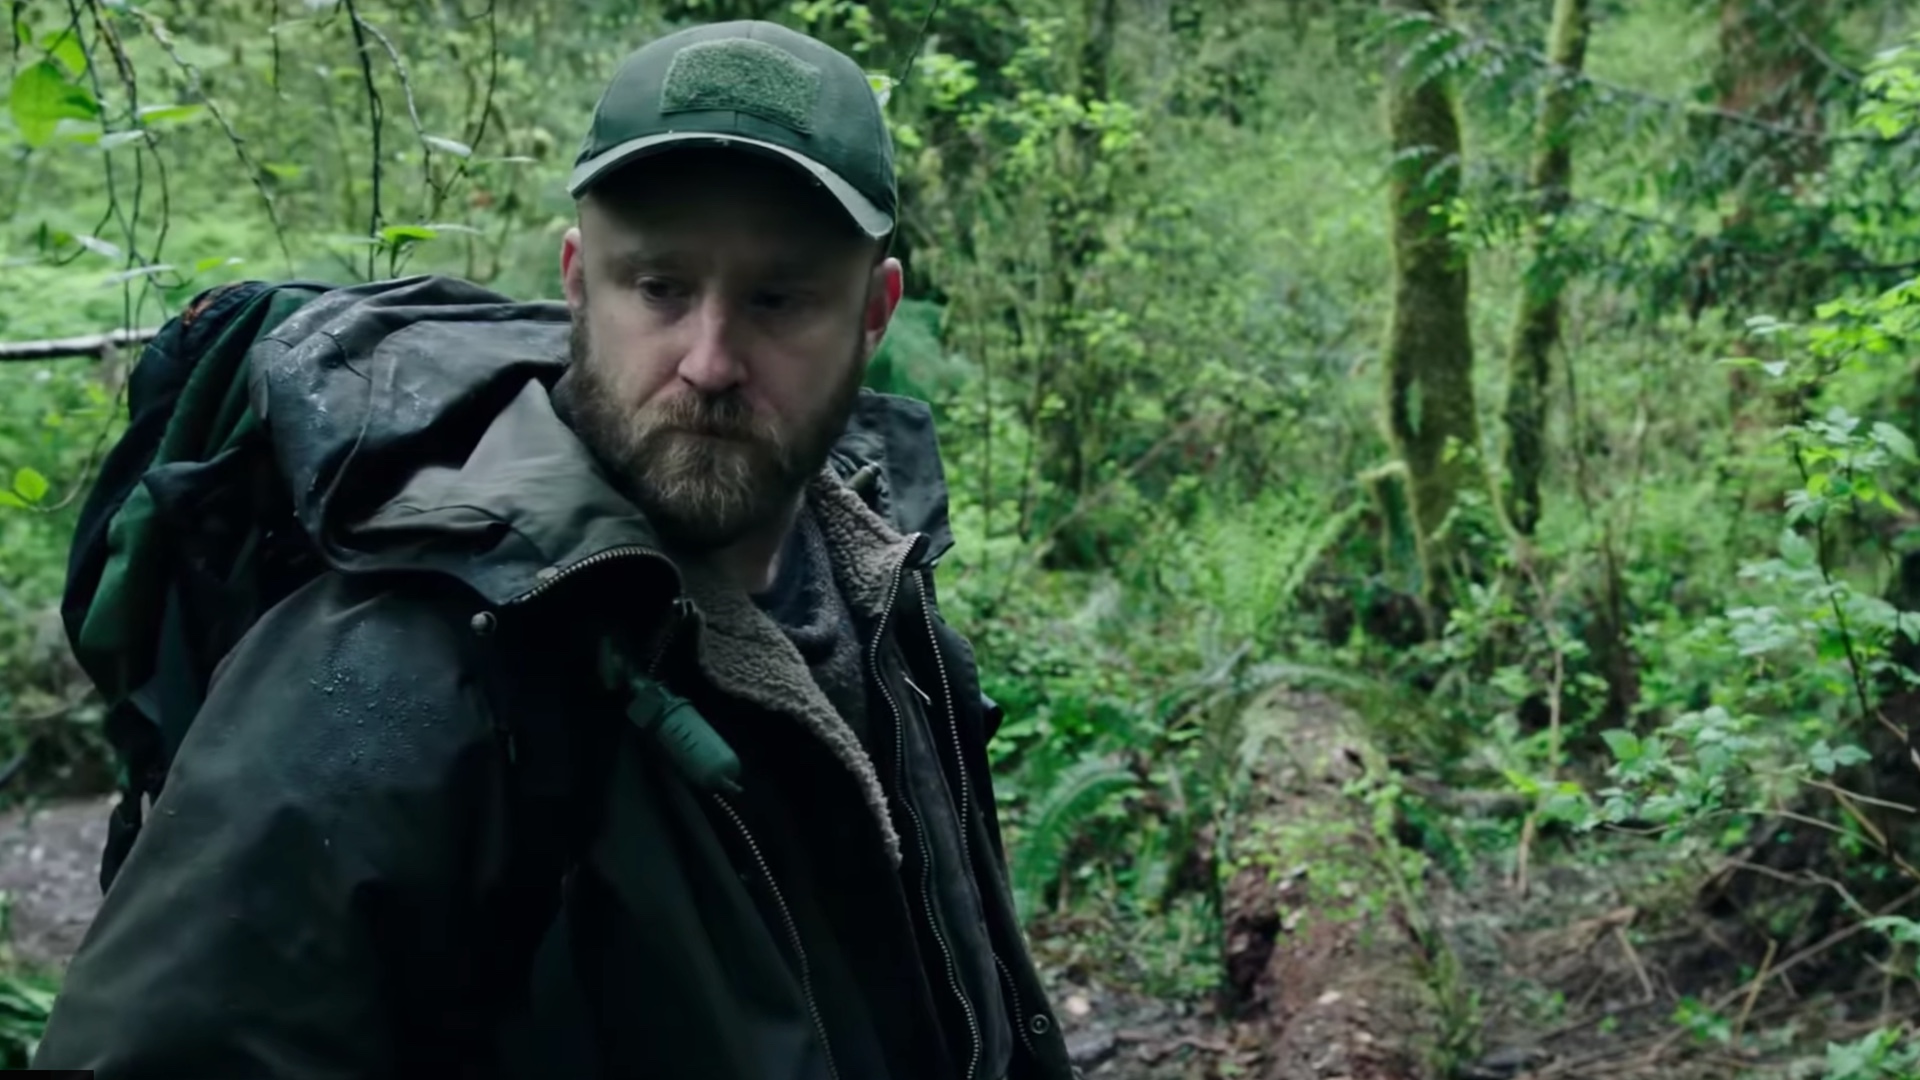 Leave No Trace 2018 Movie Wallpapers